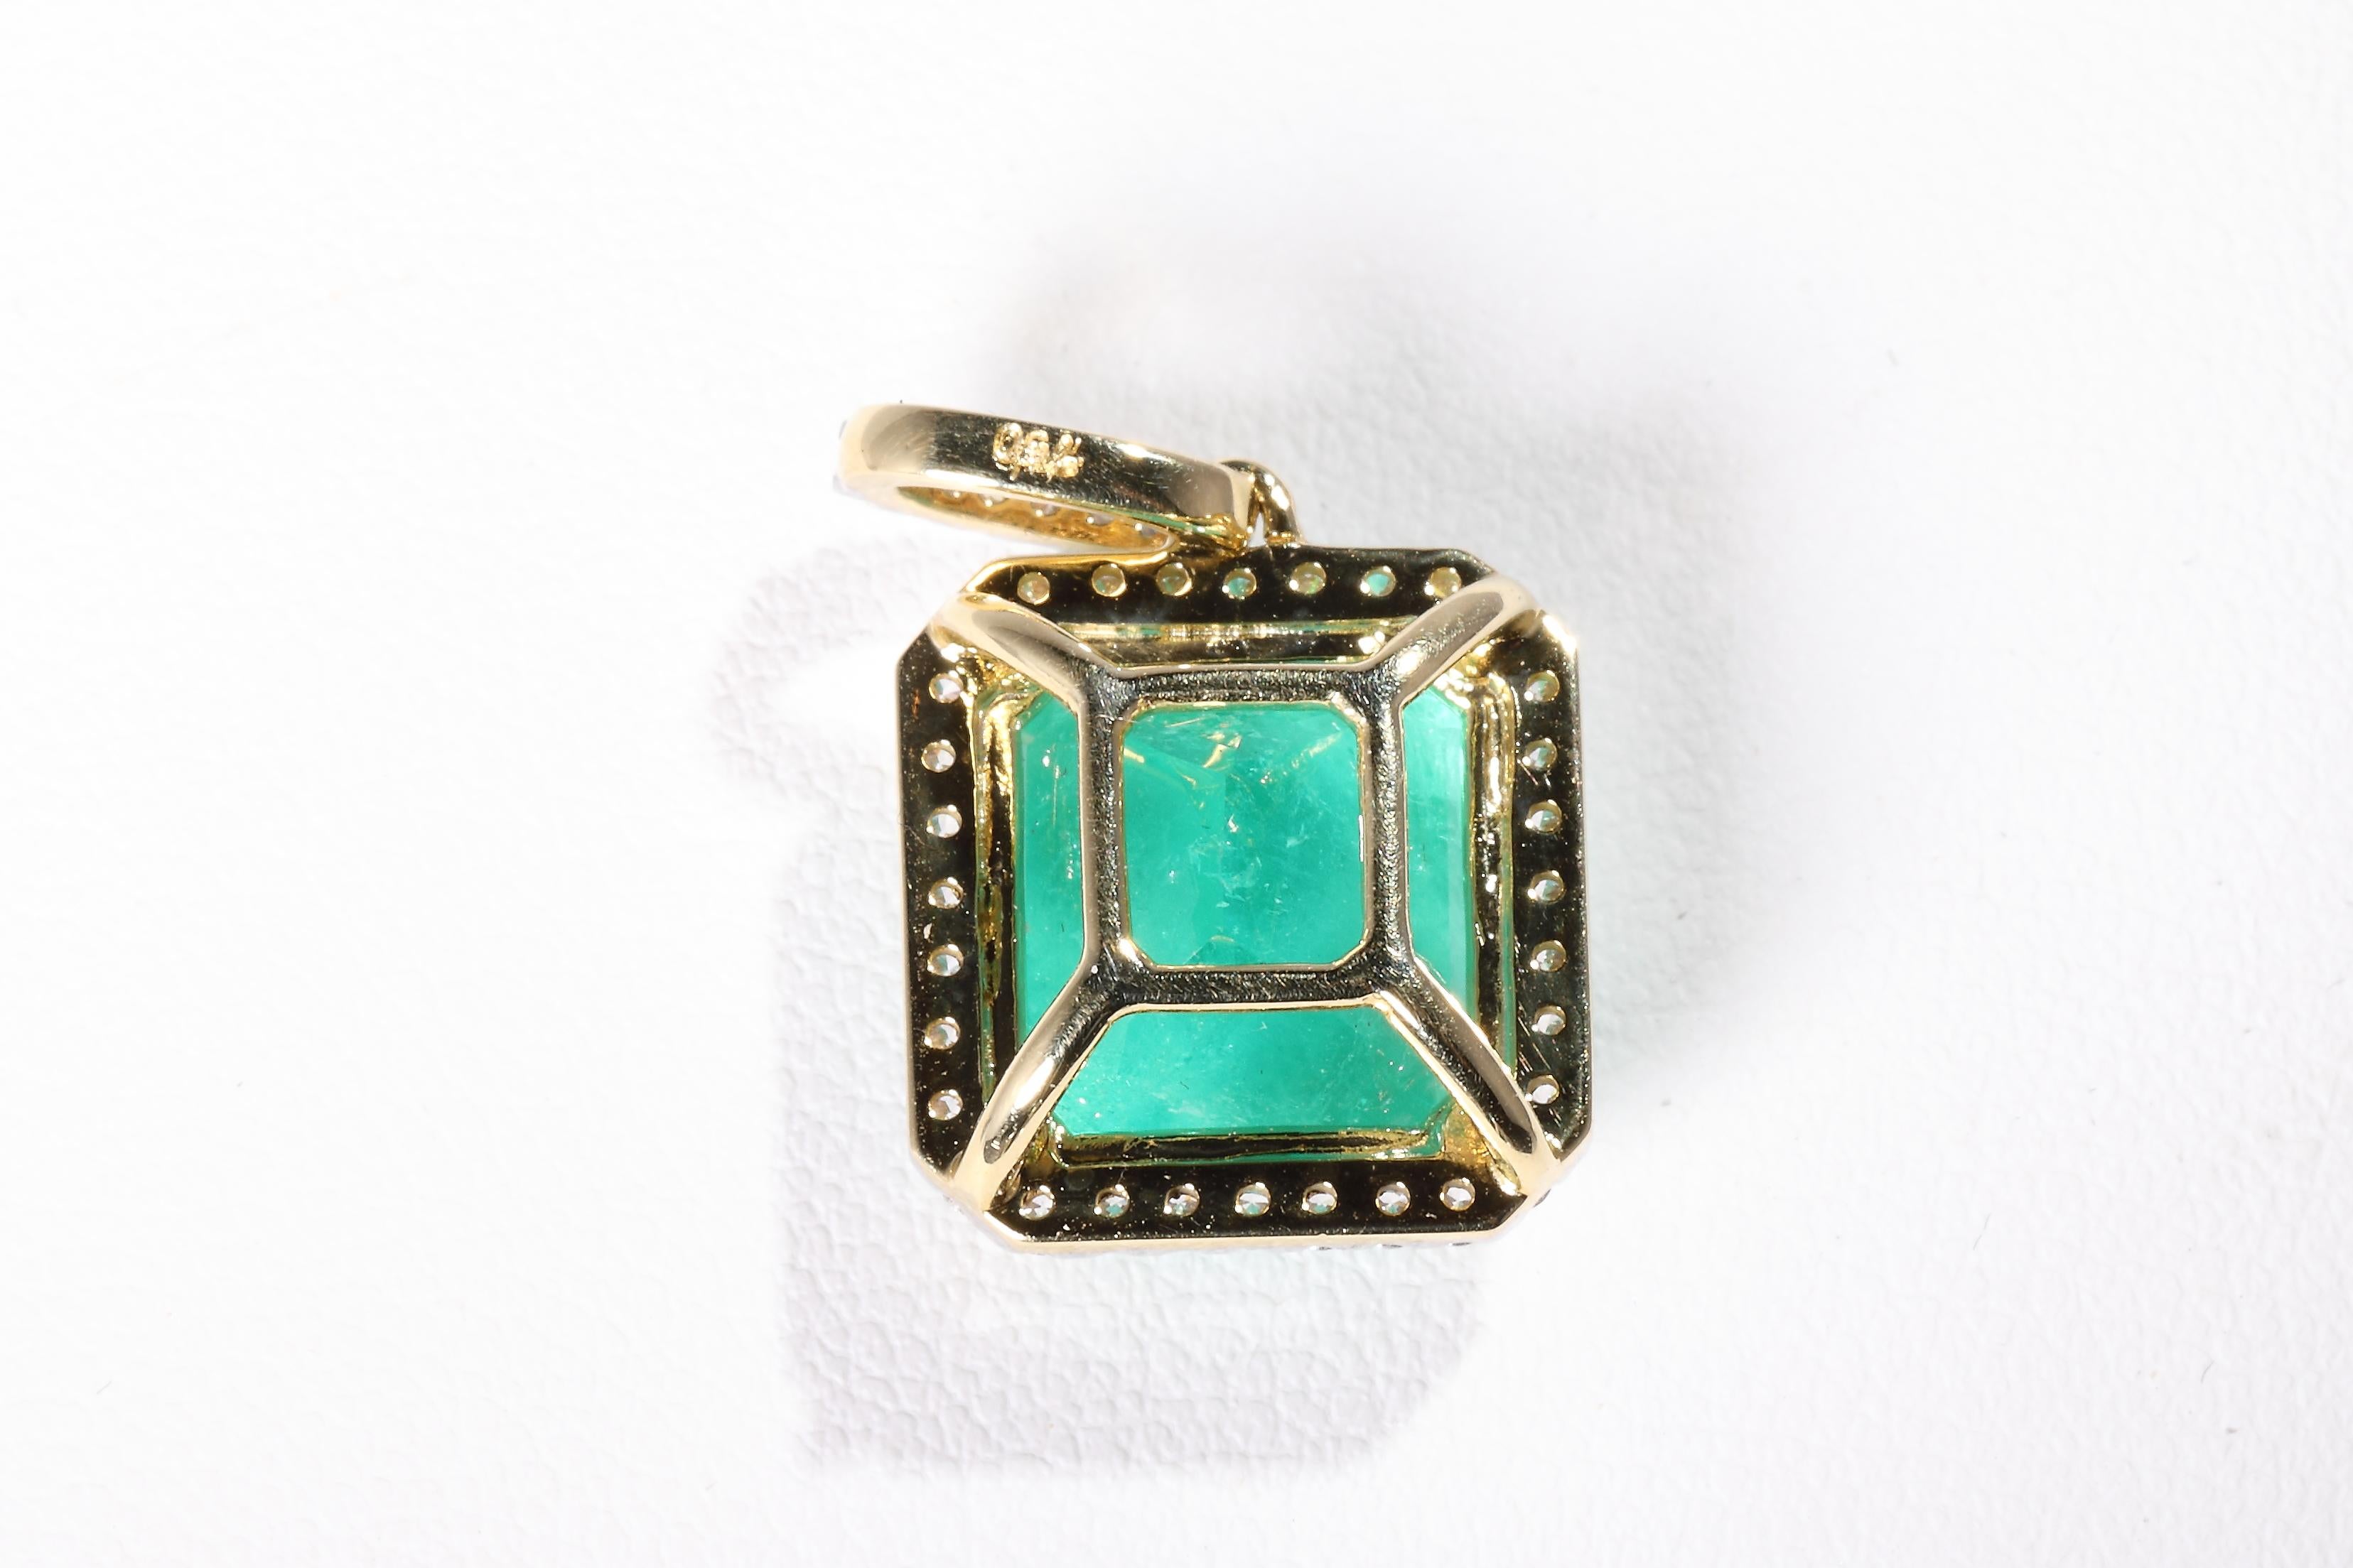 Emerald Pendant
18 k yellow gold
hallmarked with 